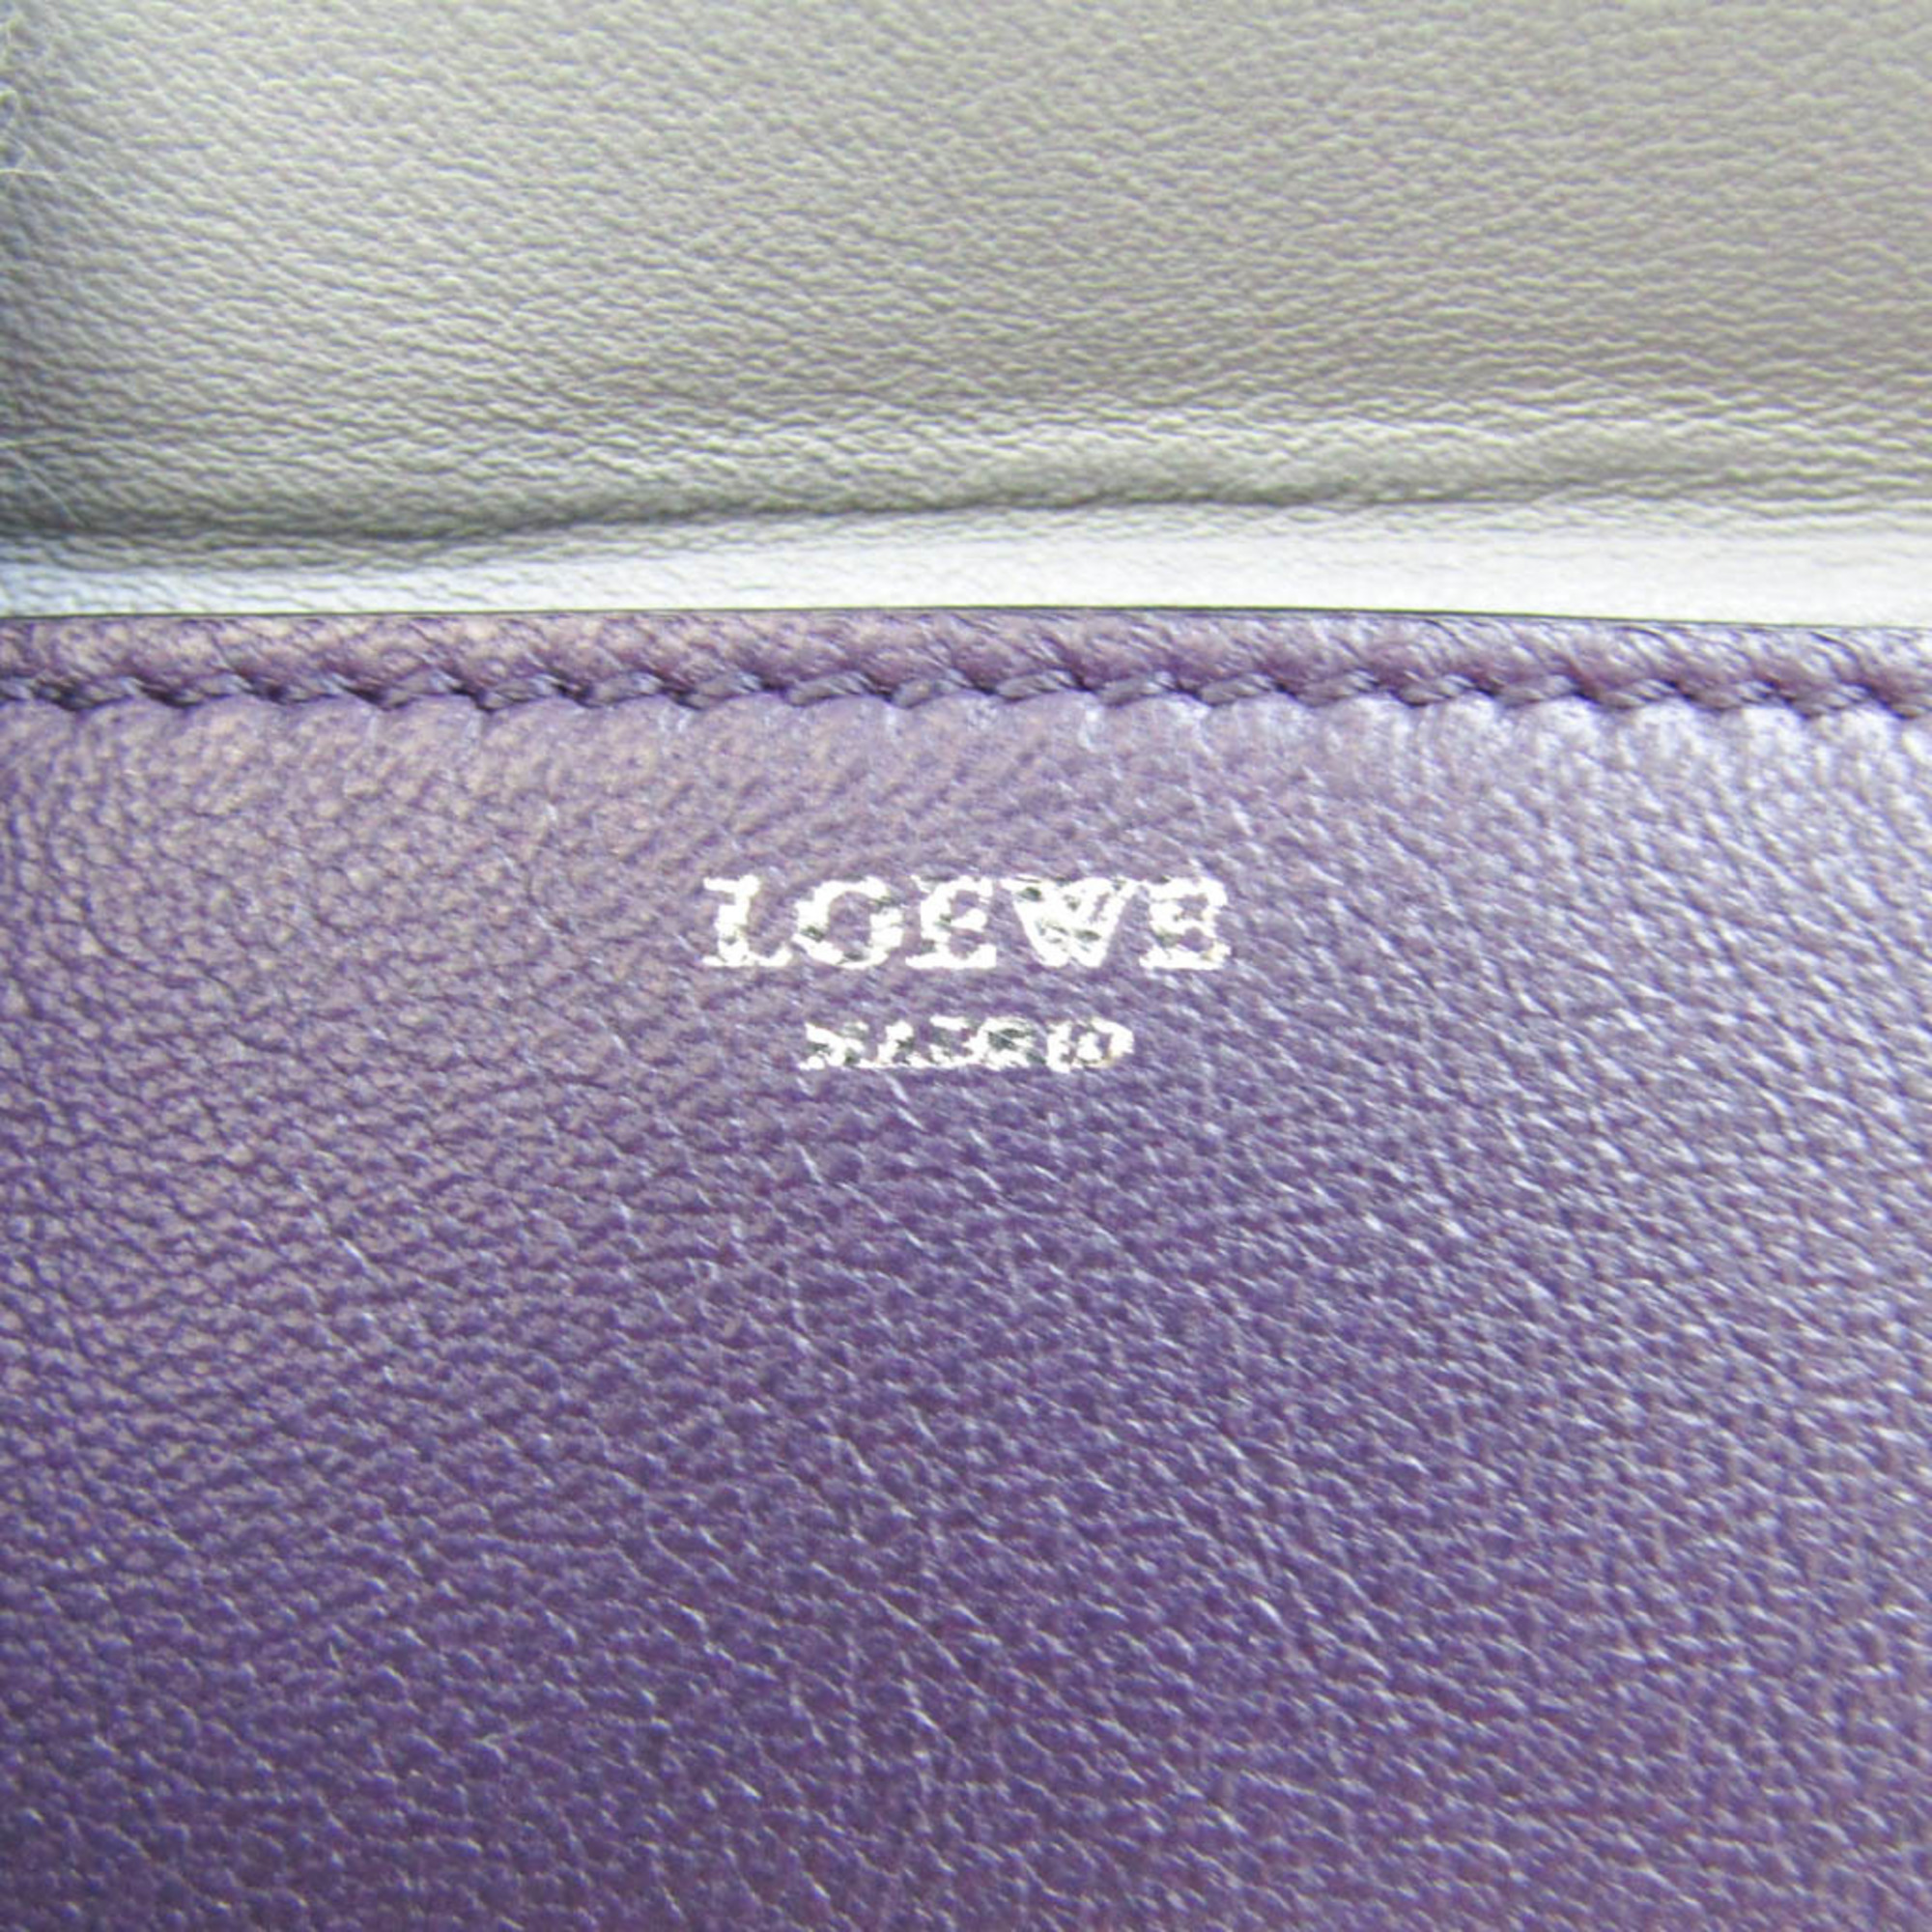 Loewe Triangle Men,Women Leather Coin Purse/coin Case Purple